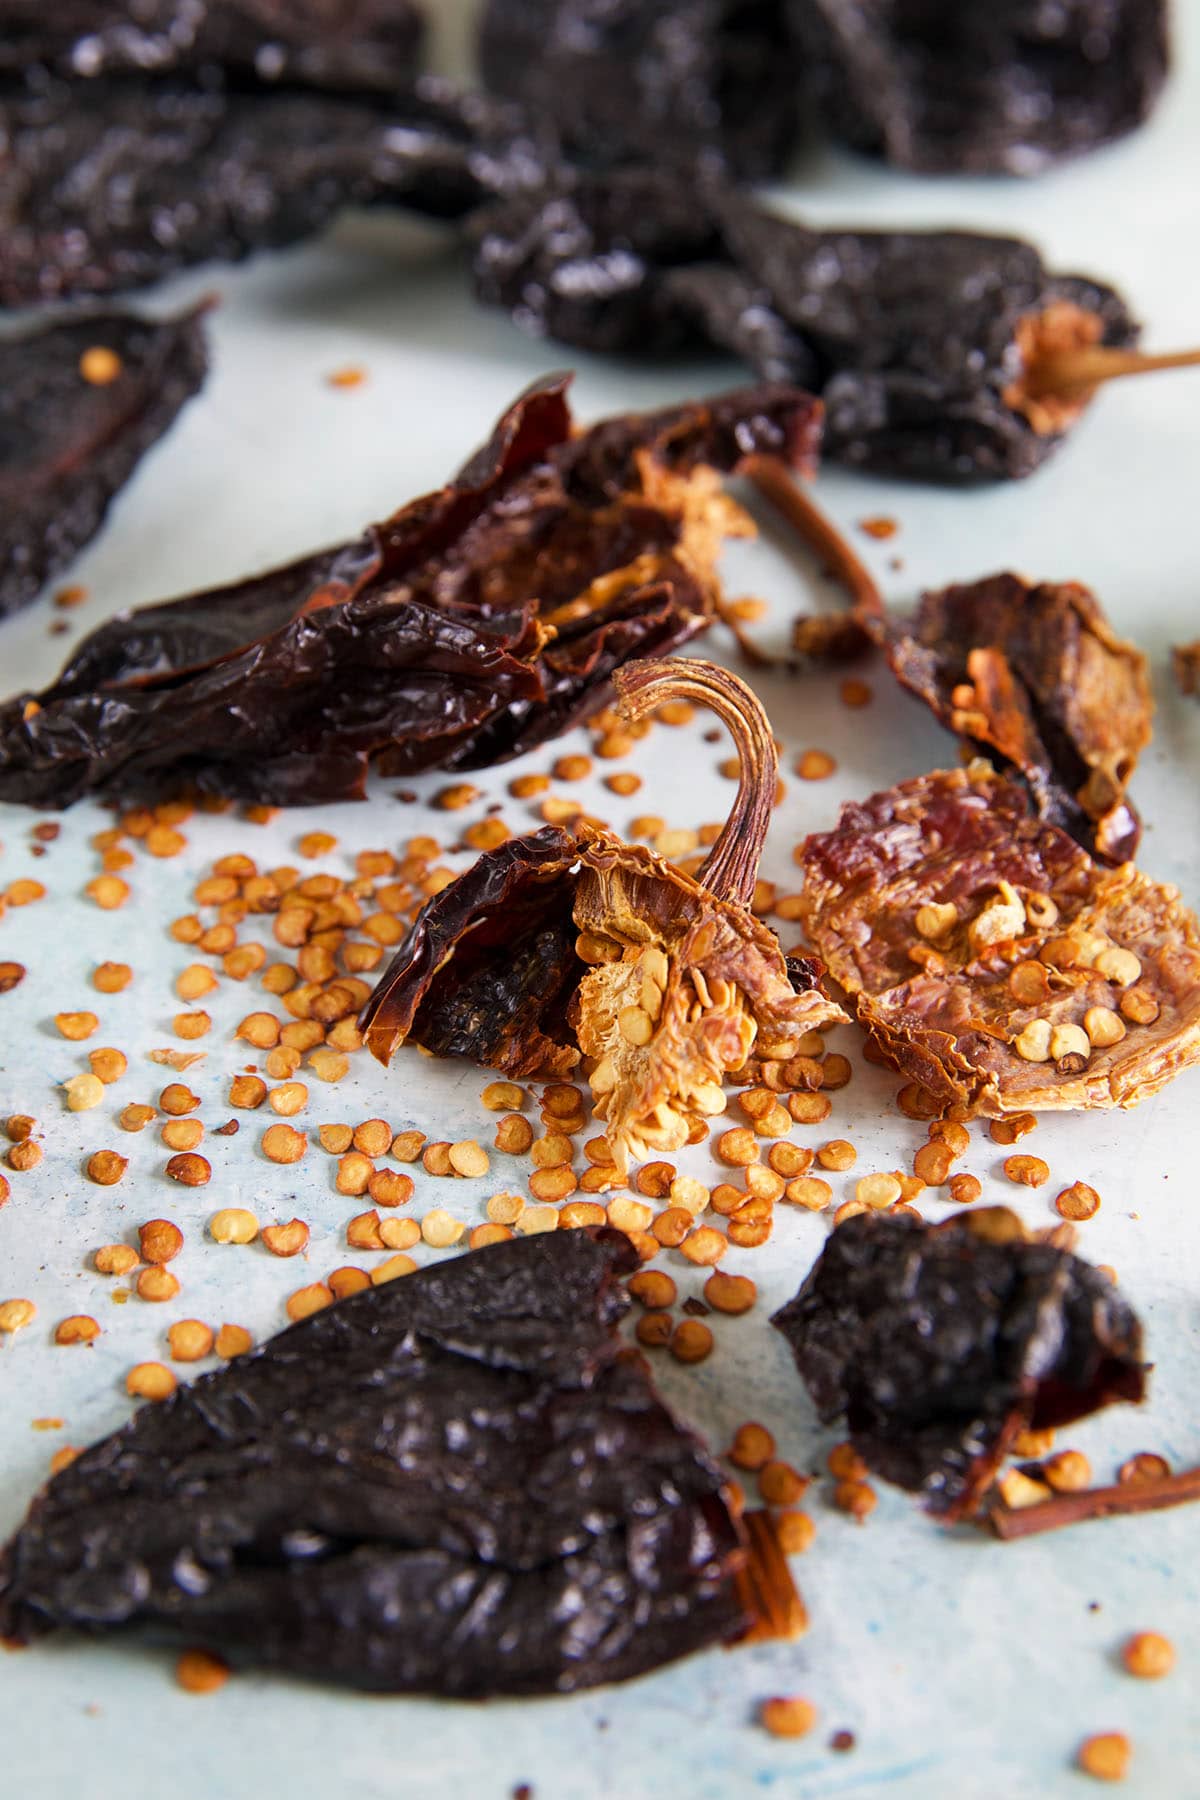 Ancho chilis are broken on a white surface, revealing many seeds.